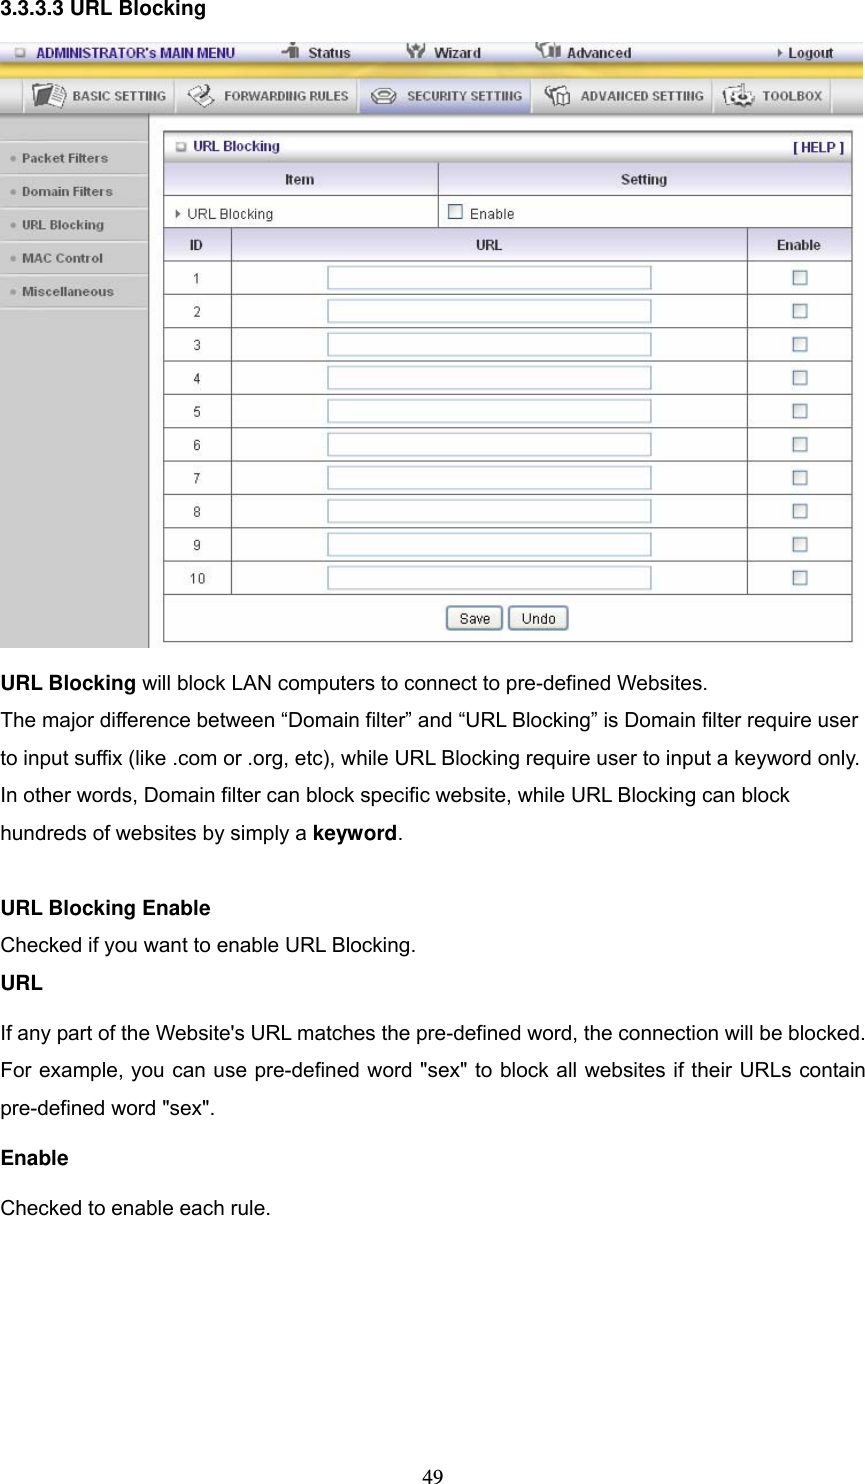  493.3.3.3 URL Blocking  URL Blocking will block LAN computers to connect to pre-defined Websites. The major difference between “Domain filter” and “URL Blocking” is Domain filter require user to input suffix (like .com or .org, etc), while URL Blocking require user to input a keyword only. In other words, Domain filter can block specific website, while URL Blocking can block hundreds of websites by simply a keyword.  URL Blocking Enable Checked if you want to enable URL Blocking.   URL If any part of the Website&apos;s URL matches the pre-defined word, the connection will be blocked. For example, you can use pre-defined word &quot;sex&quot; to block all websites if their URLs contain pre-defined word &quot;sex&quot;.   Enable Checked to enable each rule. 